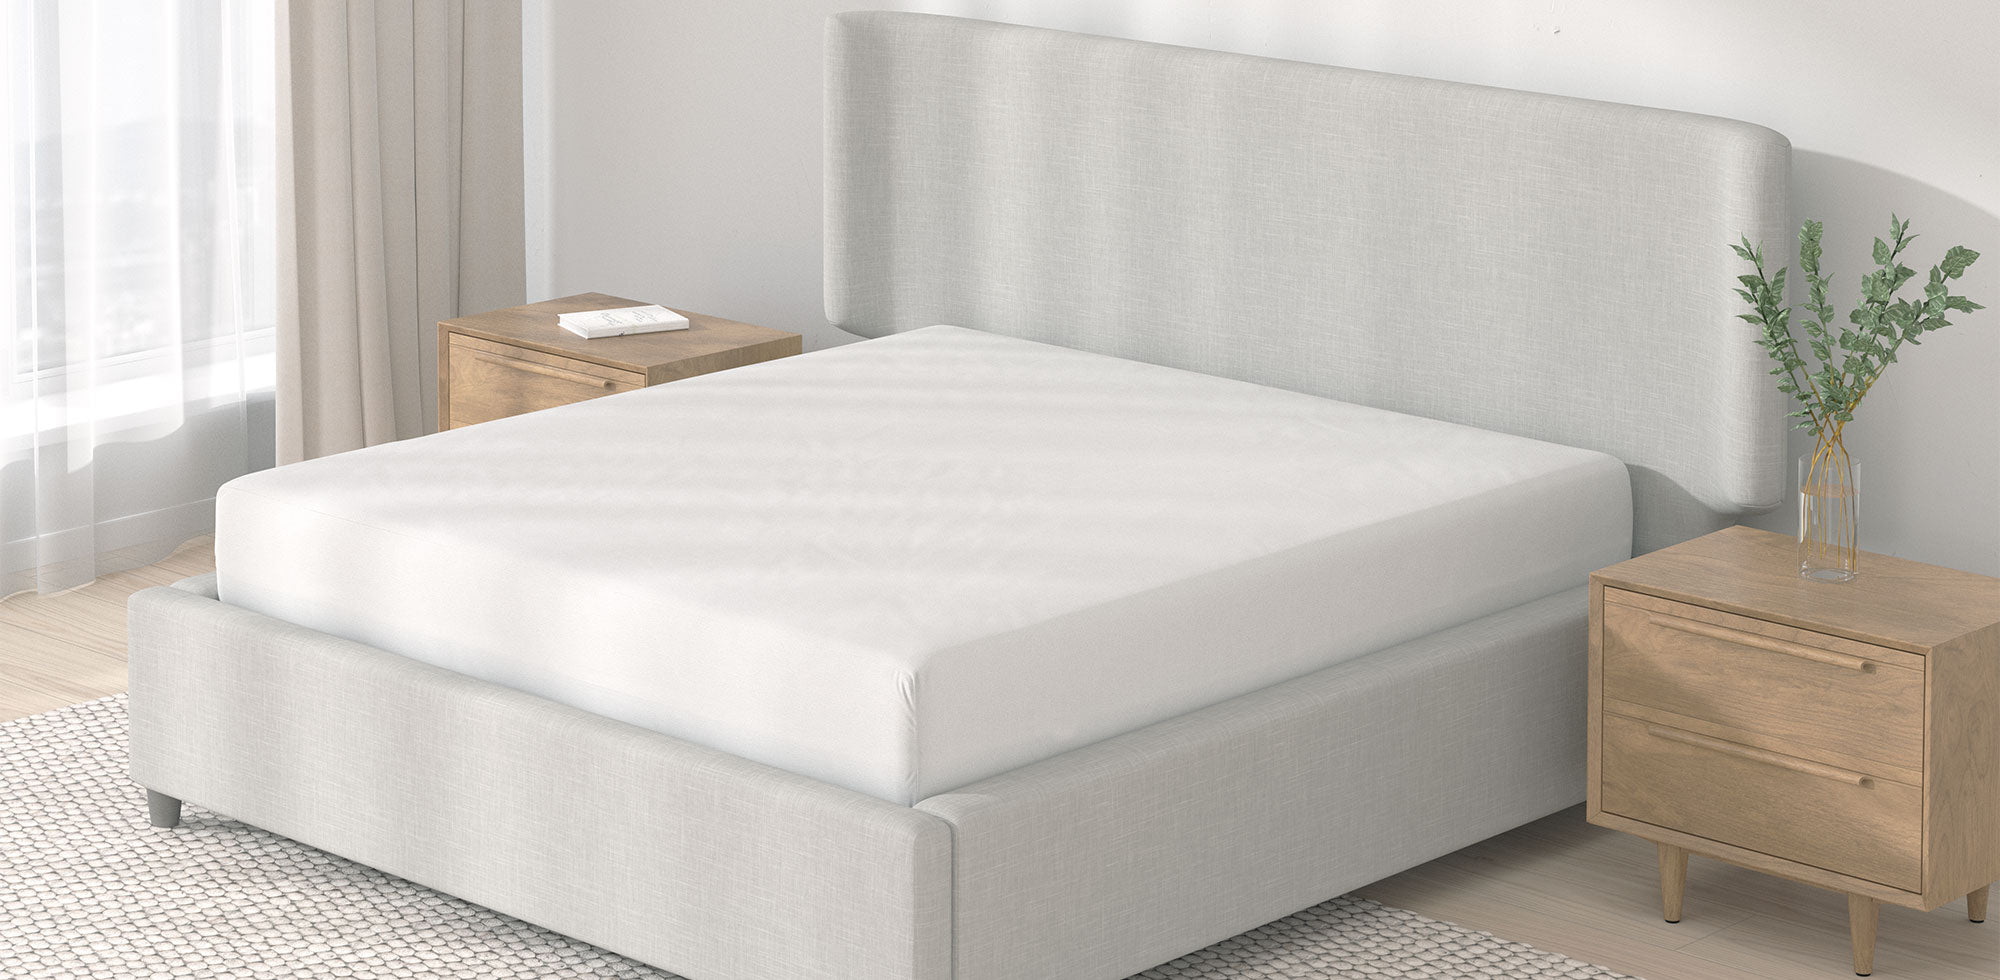 Image of an undressed bed with just a Mattress Protector on it in a light neutral room